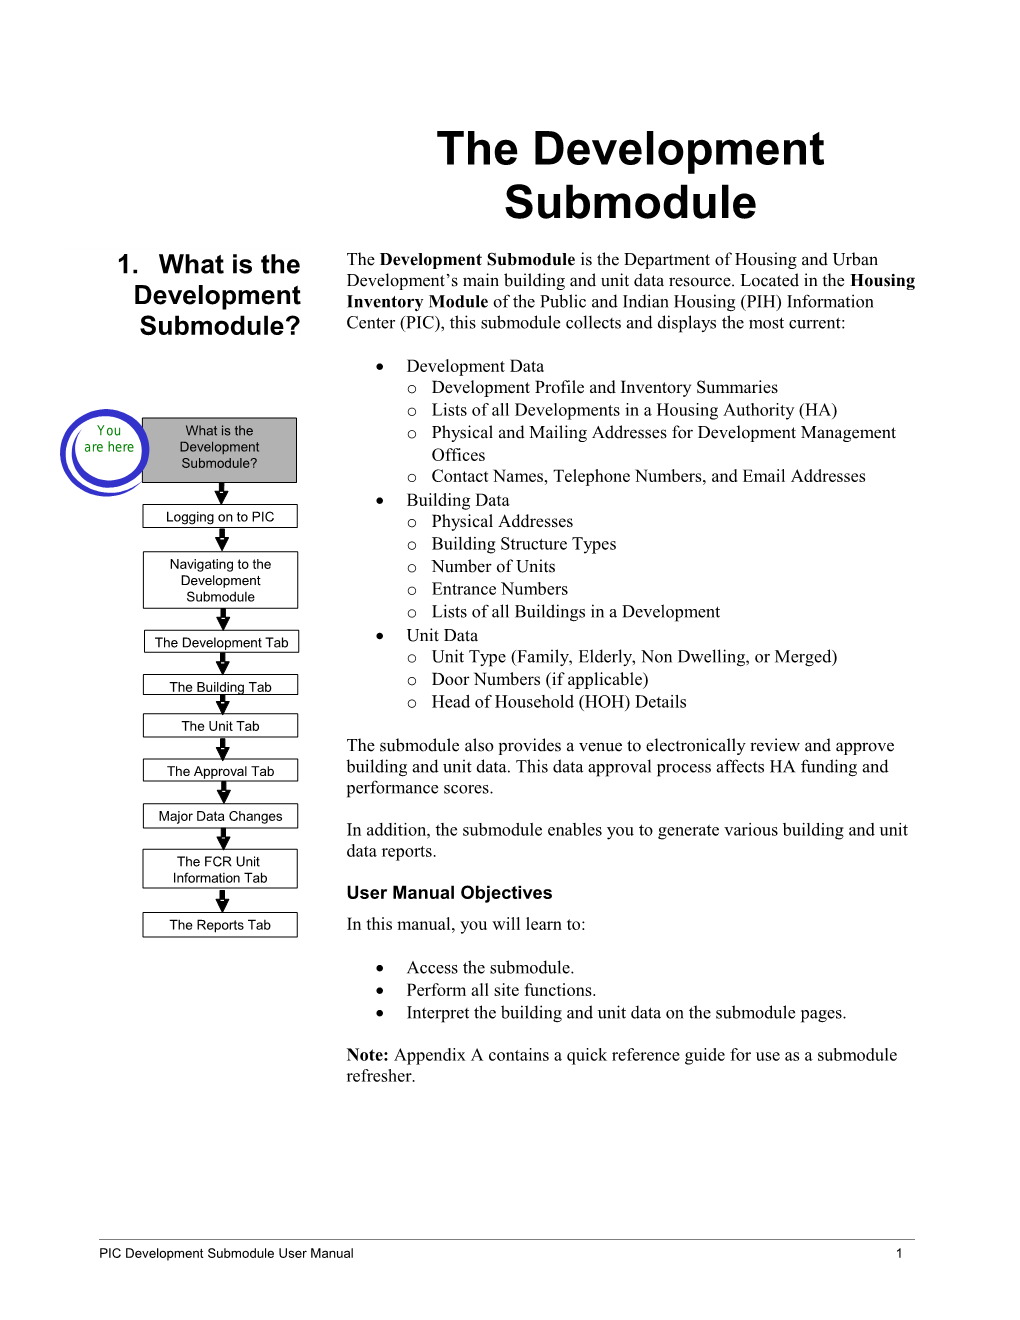 1.What Is the Development Submodule?